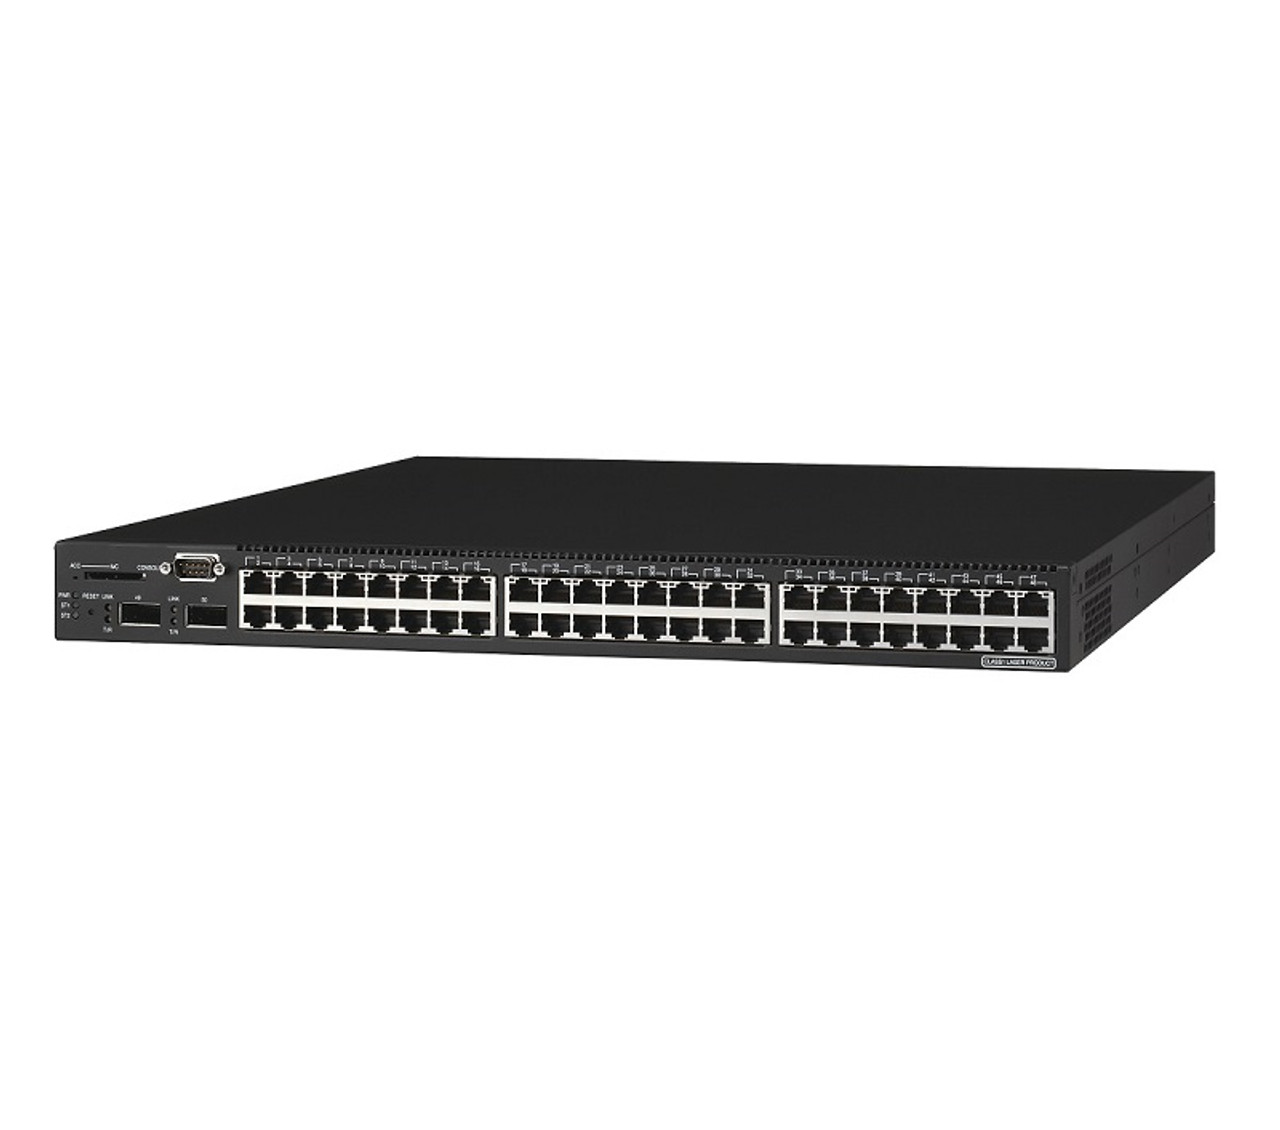 737230-B21 - HP 6125xlg Ethernet Blade Switch - Switch - 12 Ports - Managed